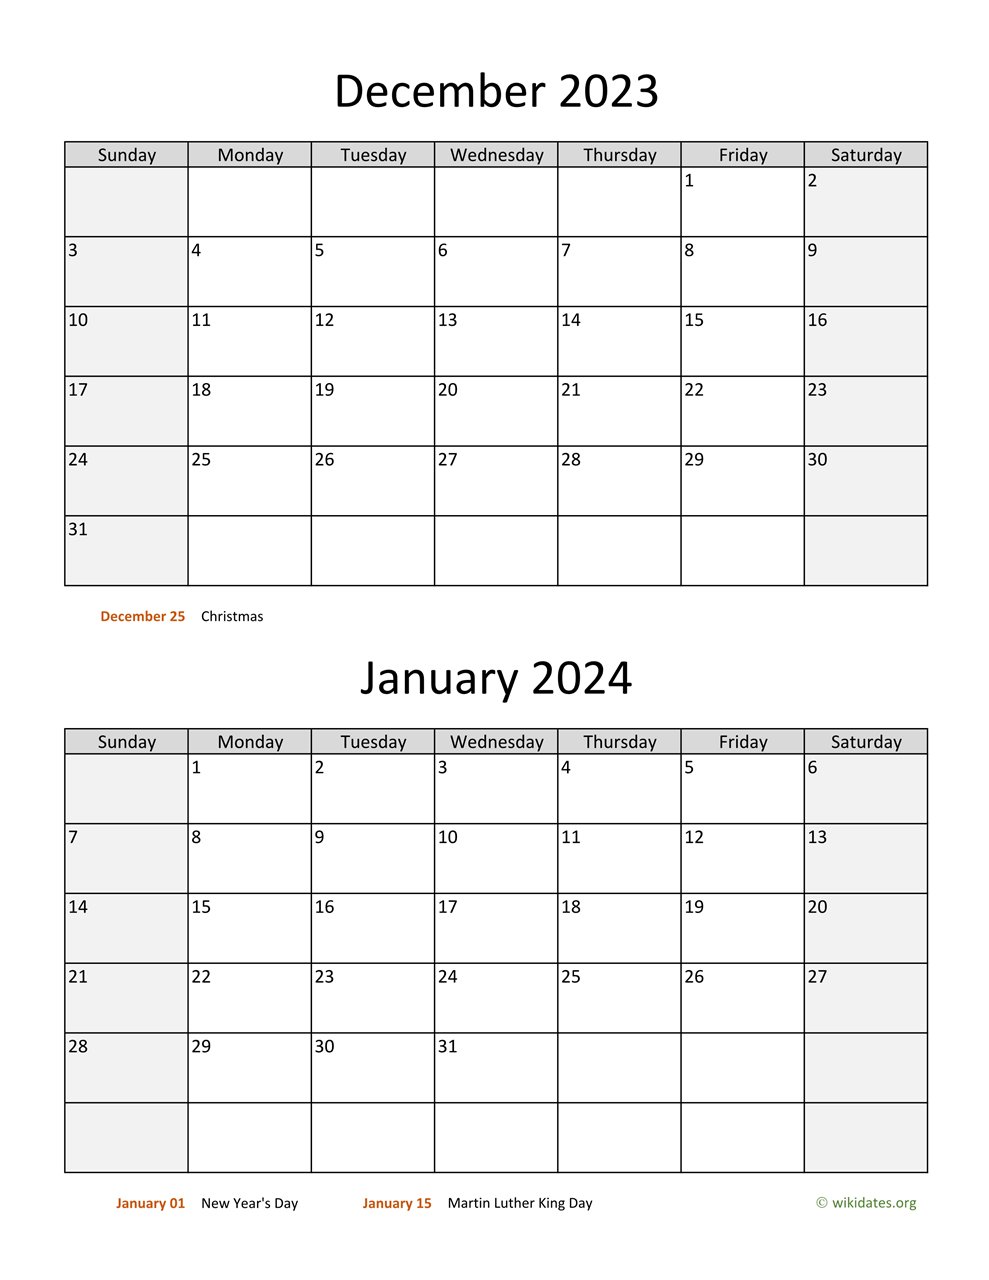 December 2023 And January 2024 Calendar | Wikidates for Calendar December 2023 And January 2024 Printable